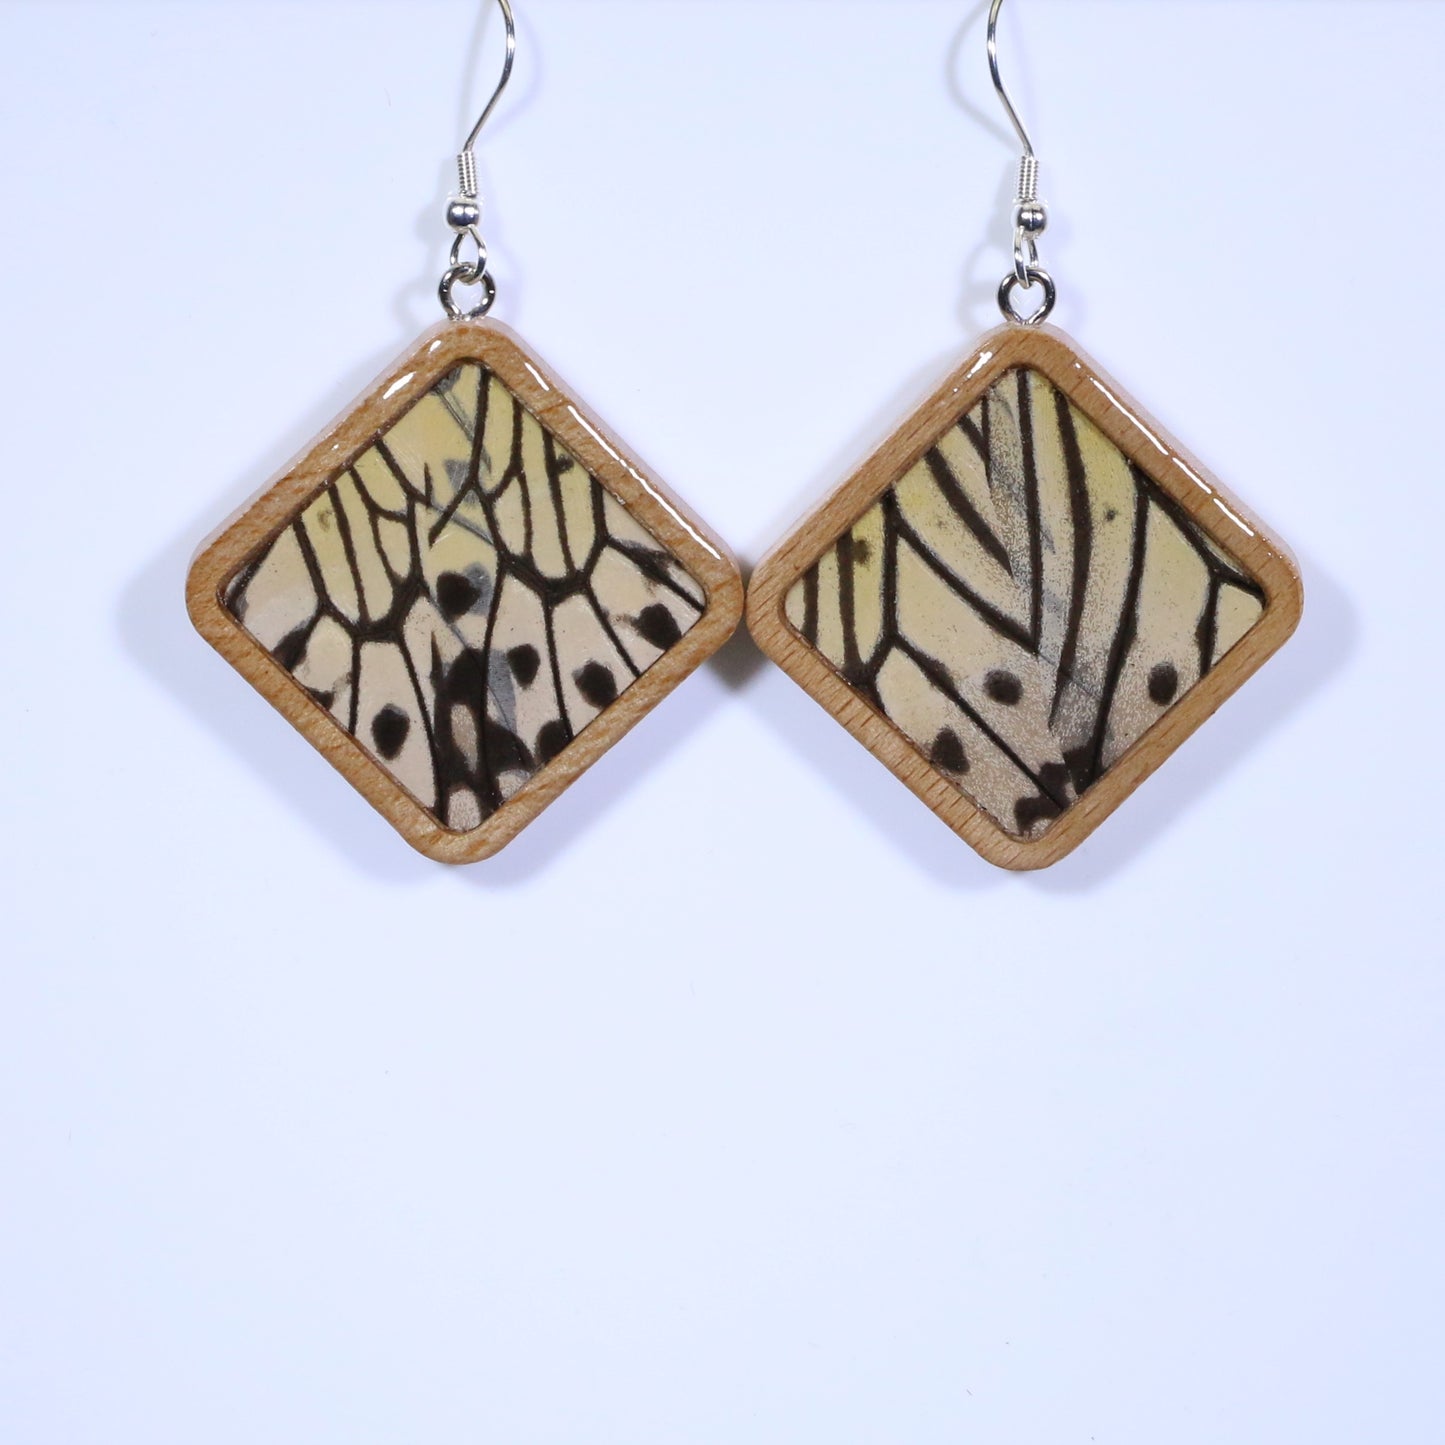 51009 - Real Butterfly Wing Jewelry - Earring Collection - Paper Kite Butterfly